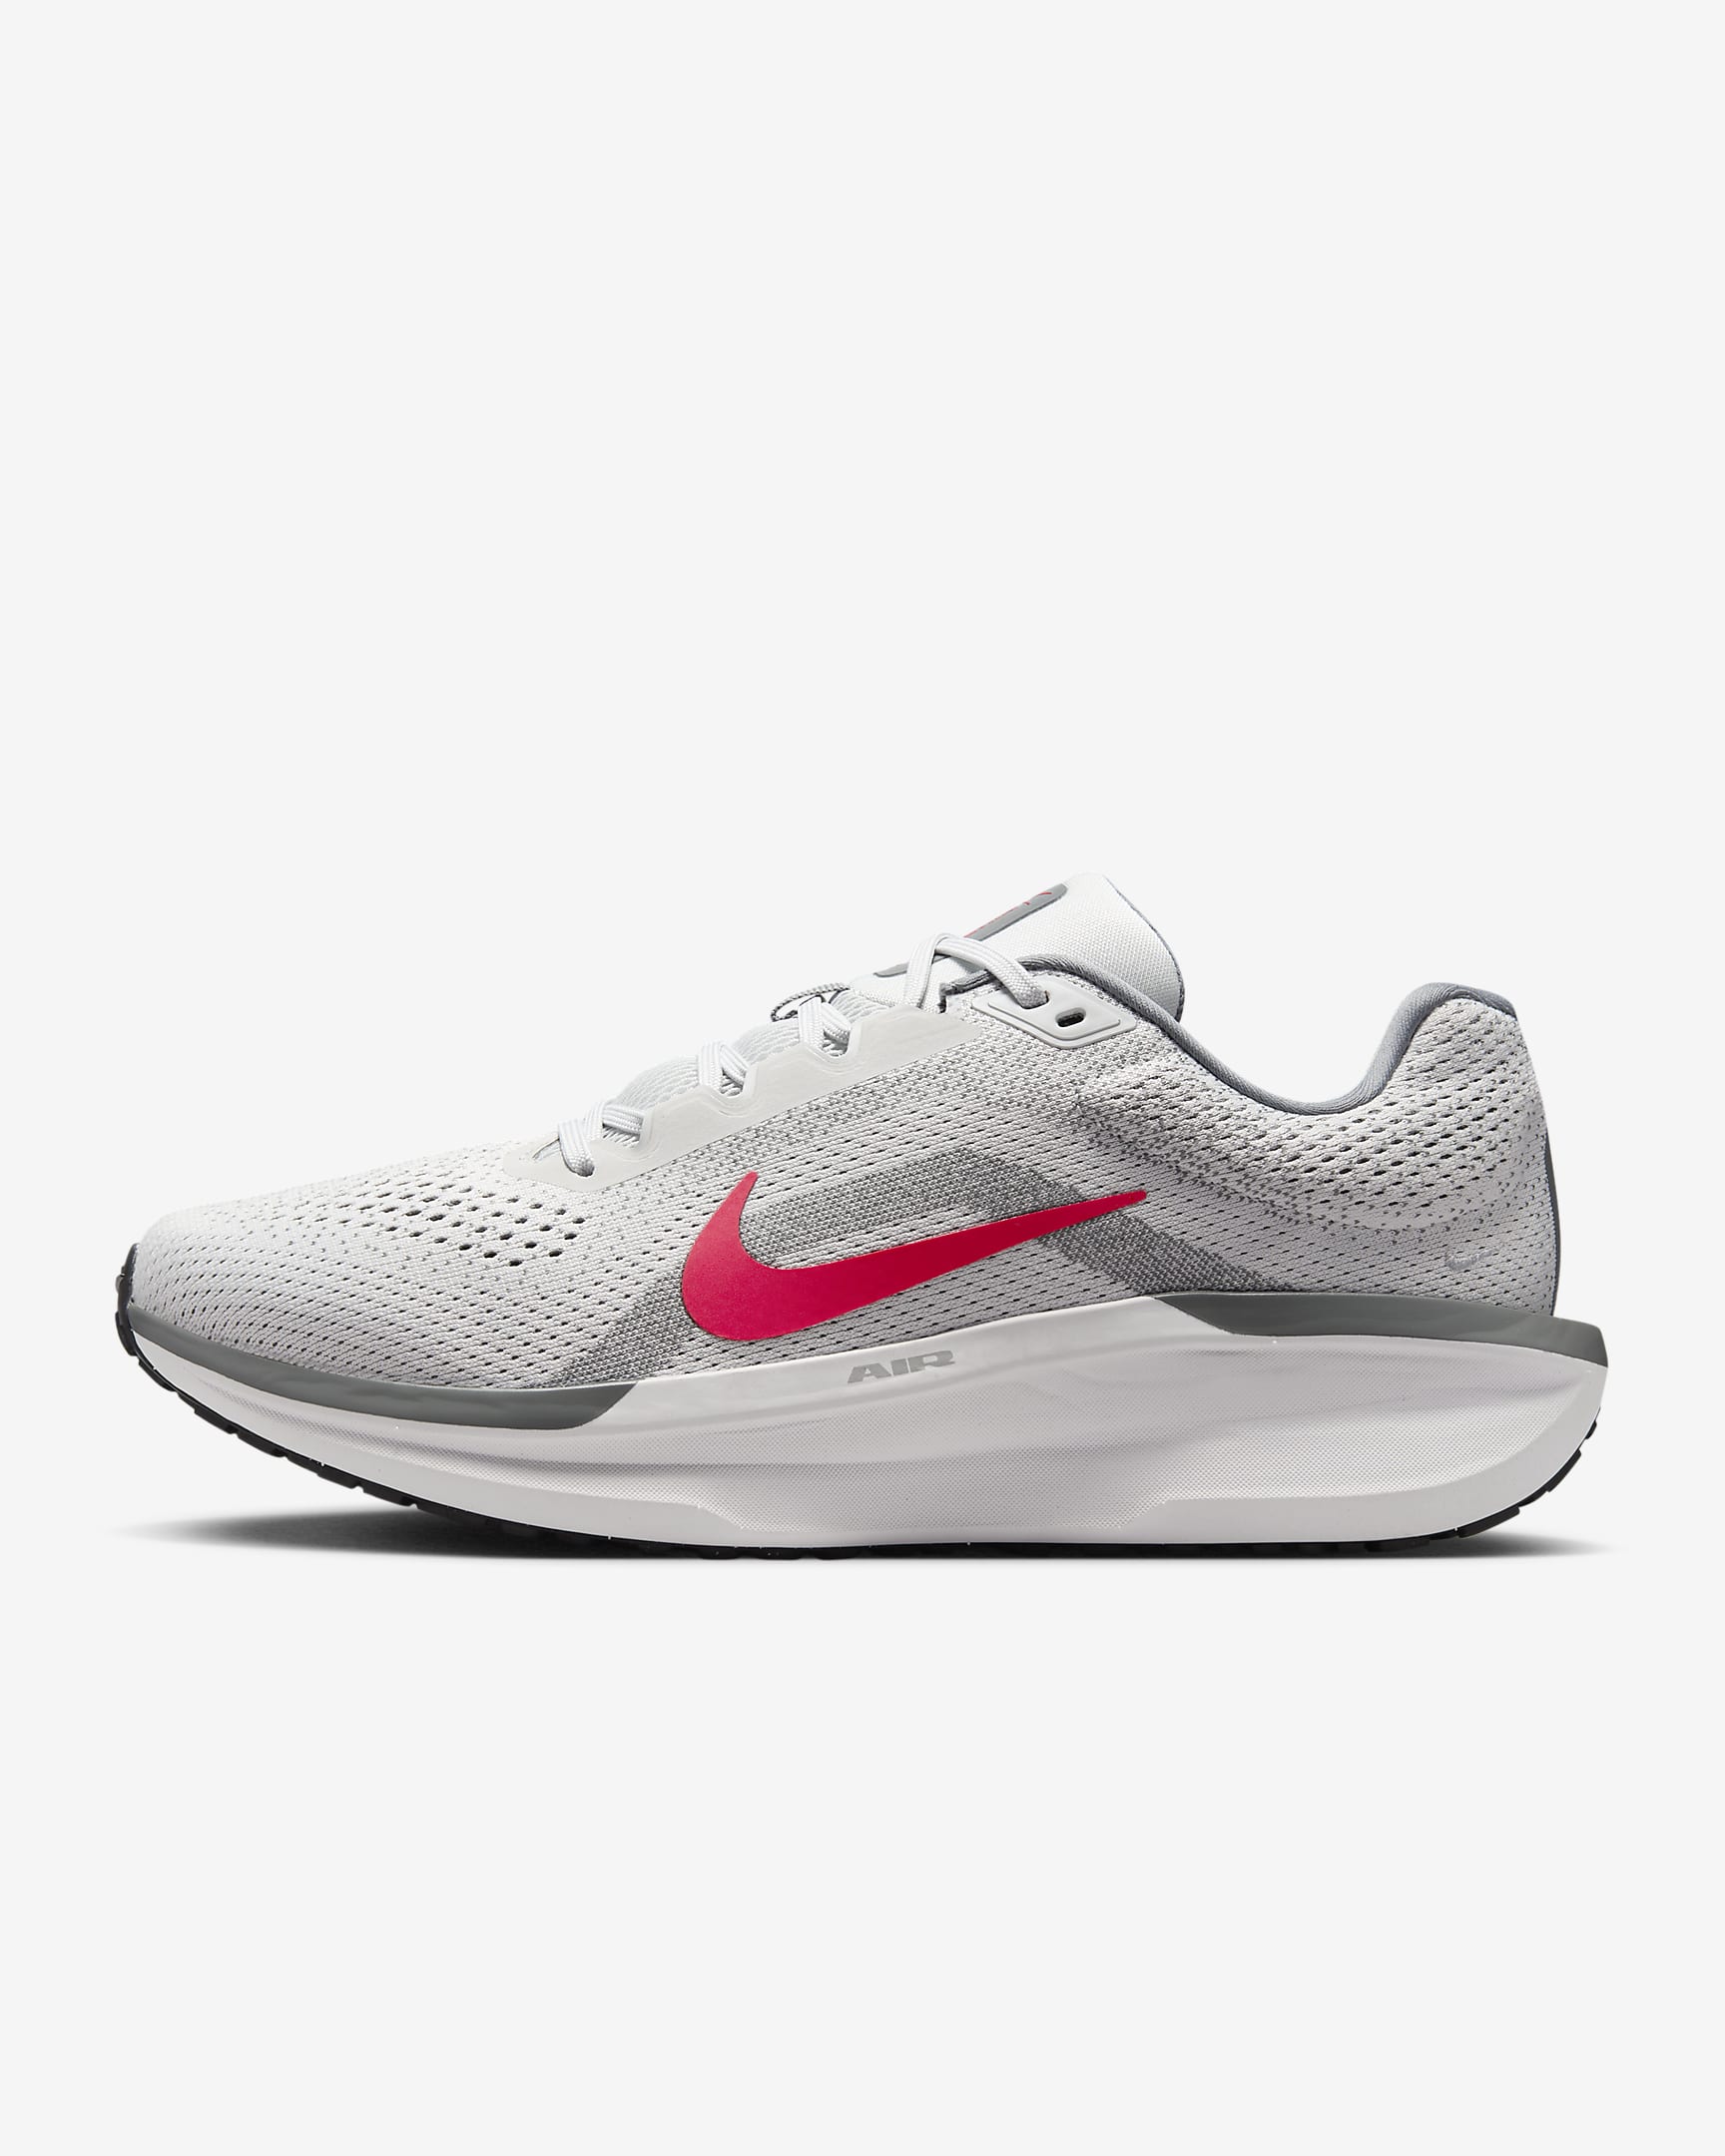 wio-11-mens-road-running-shoes-Np76rh.png